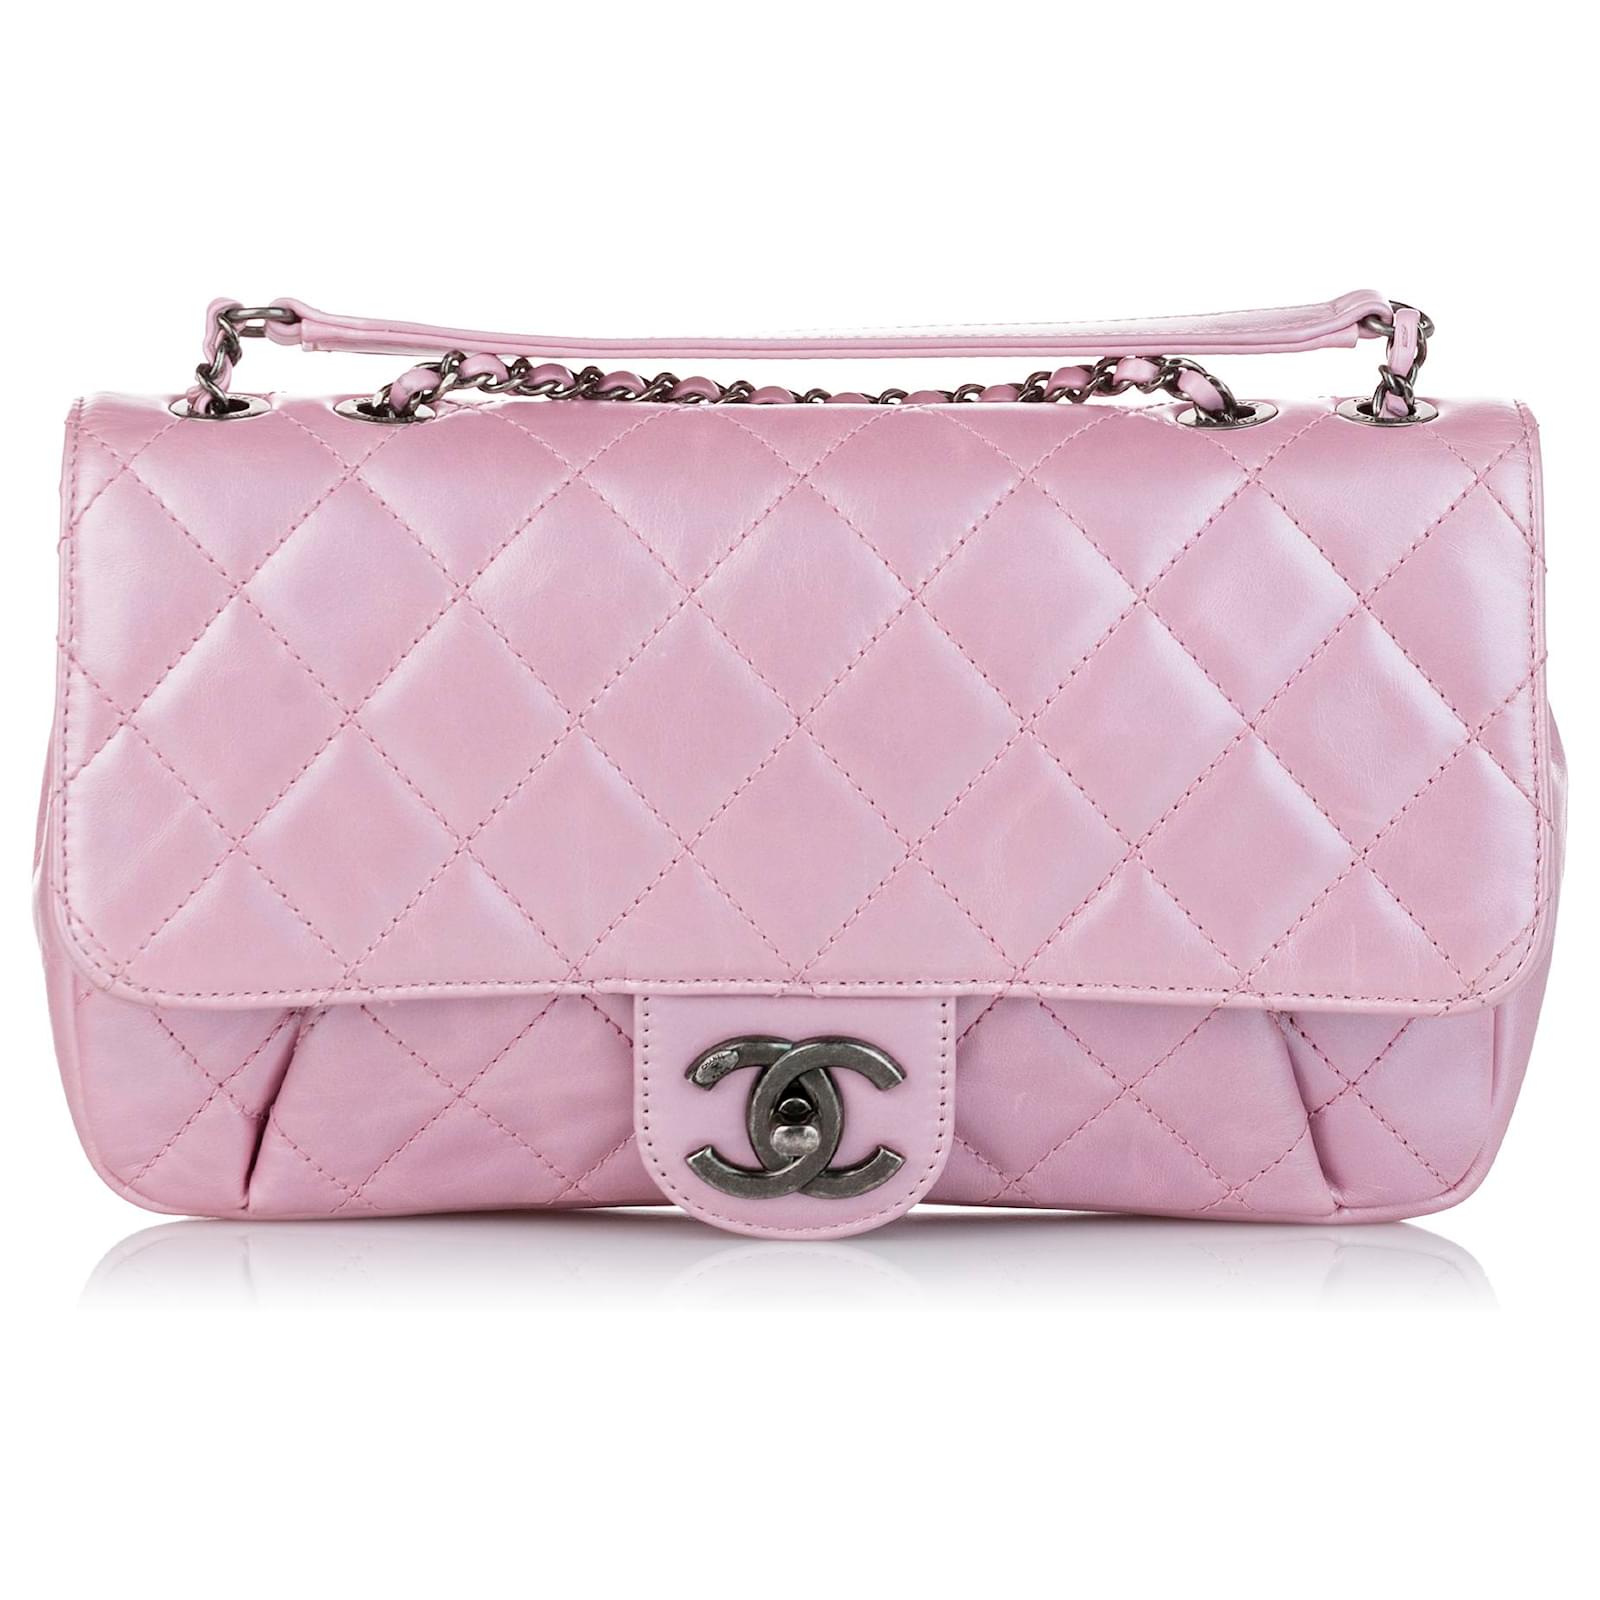 Chanel Vintage Mademoiselle Lock Flap Bag Leather Small Pink